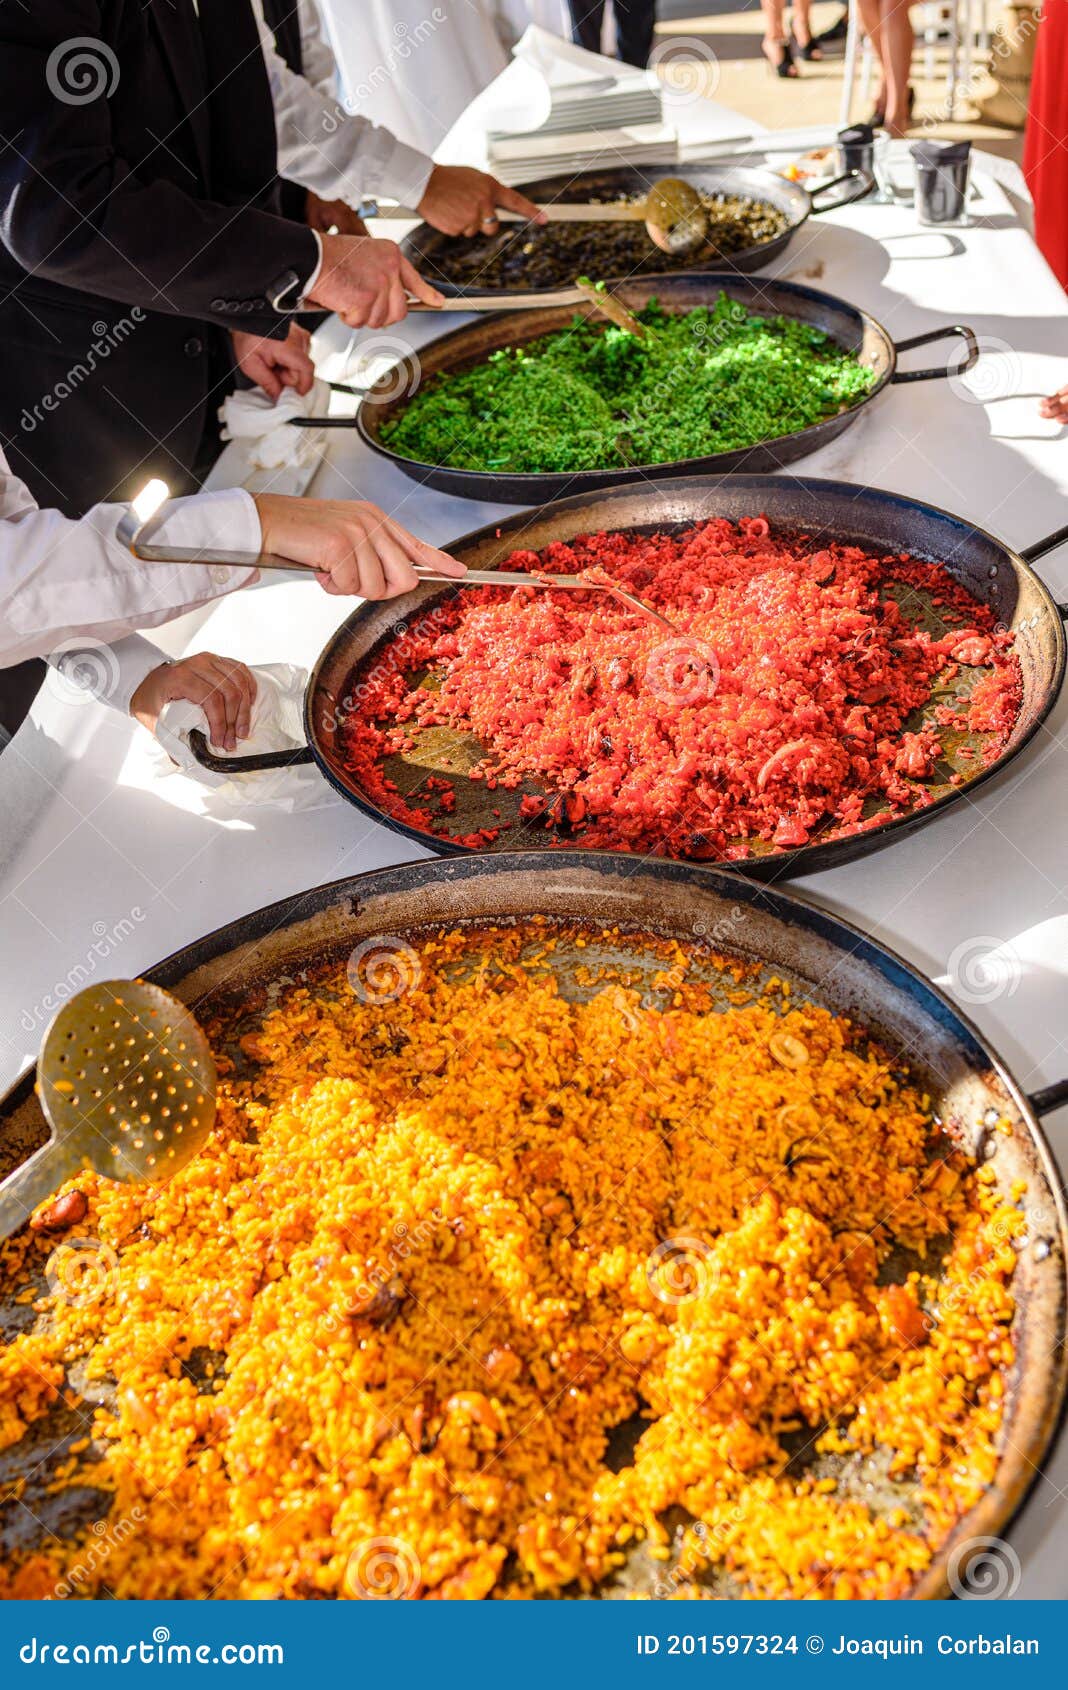 sample and tasting of various types of valencian paellas, a traditional spanish dish for tourists